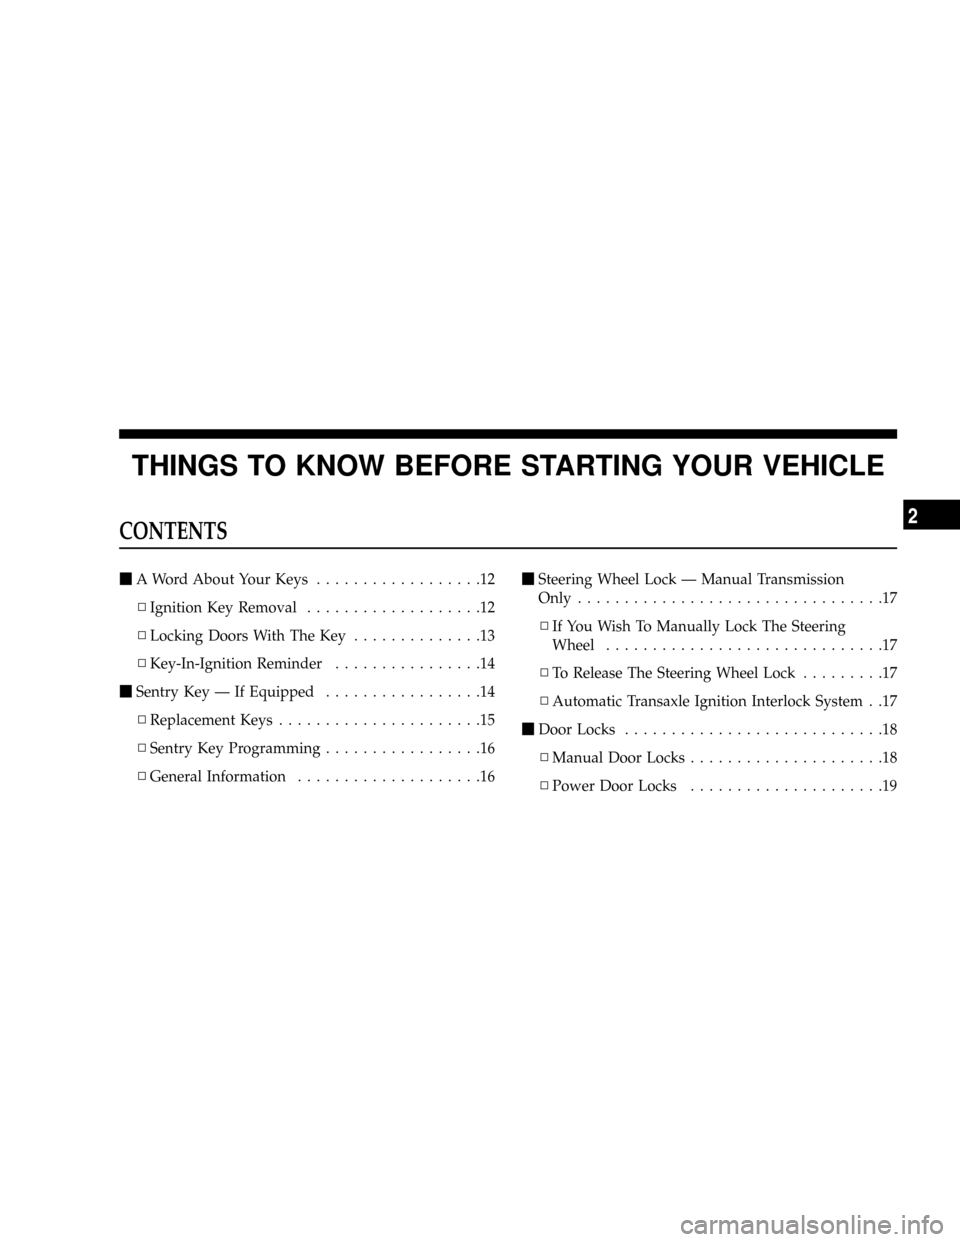 JEEP PATRIOT 2007 1.G Owners Manual THINGS TO KNOW BEFORE STARTING YOUR VEHICLE
CONTENTS
mA Word About Your Keys..................12
NIgnition Key Removal...................12
NLocking Doors With The Key..............13
NKey-In-Ignition